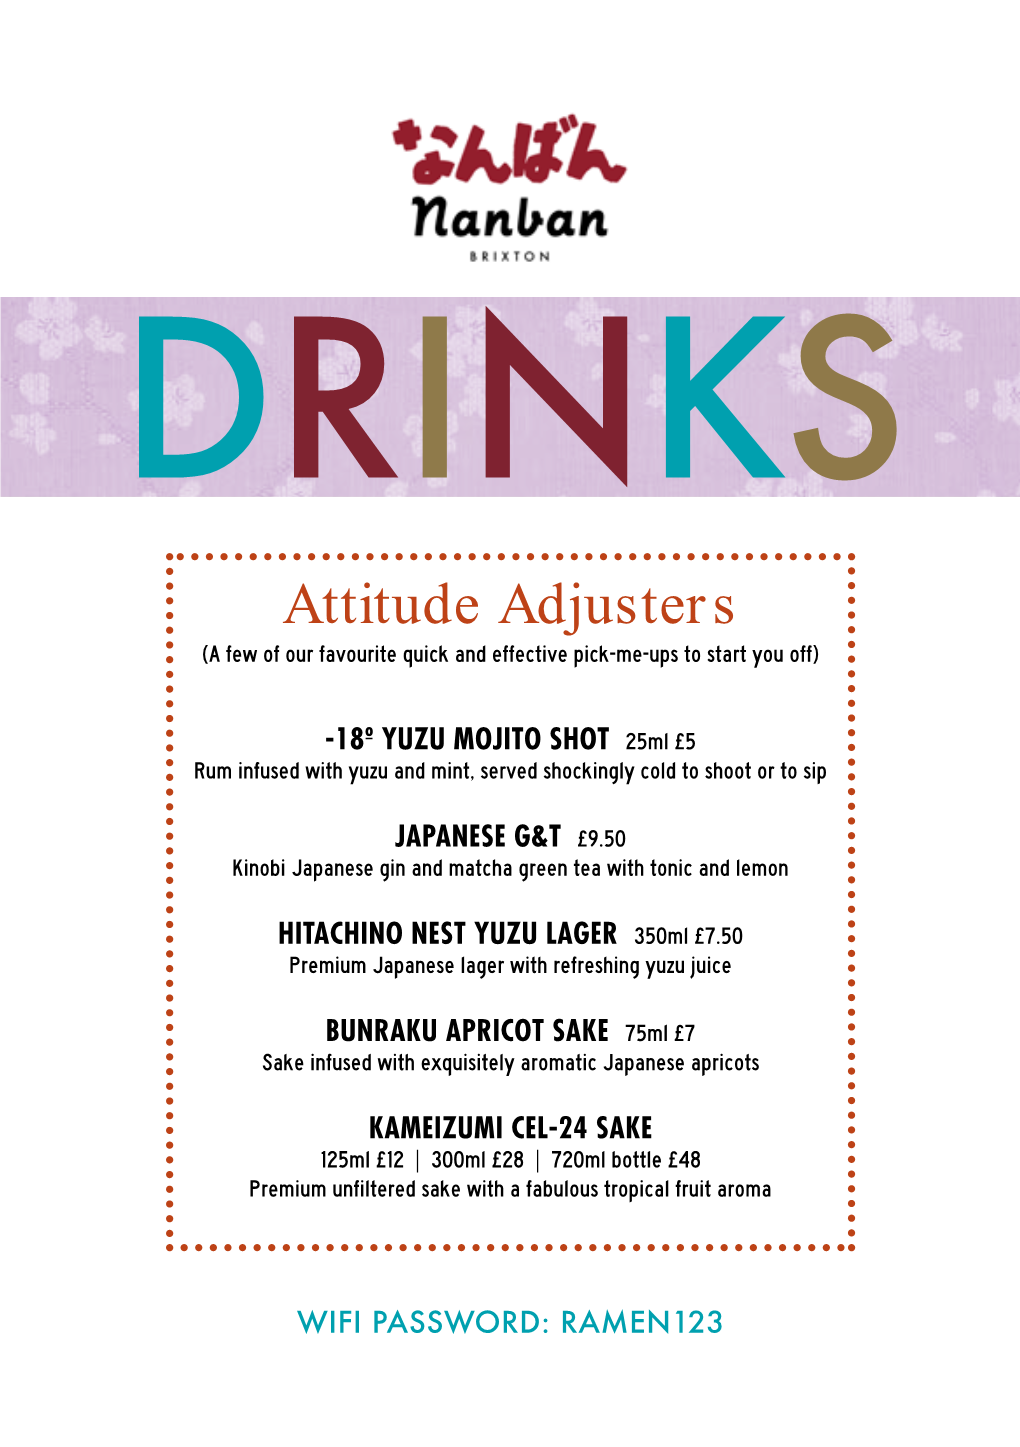 Attitude Adjusters (A Few of Our Favourite Quick and Effective Pick-Me-Ups to Start You Off)